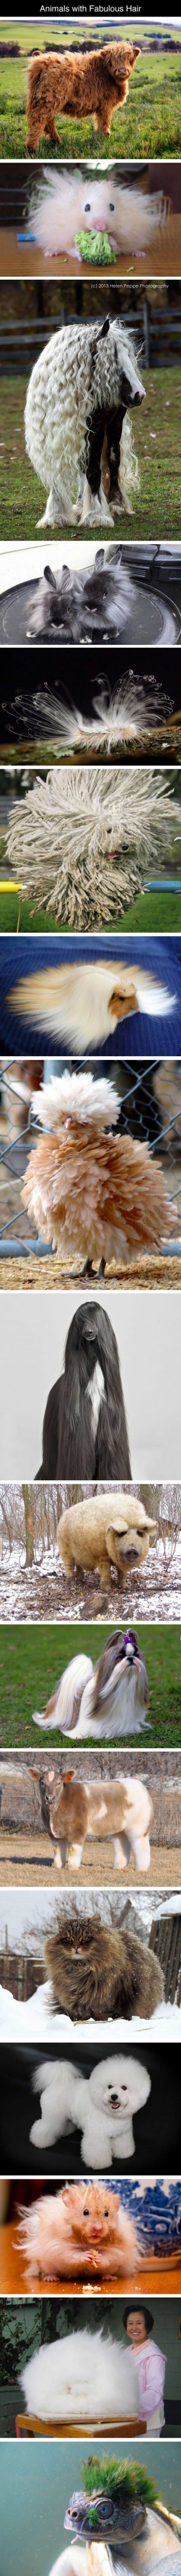 animals with fabulous hair funny picture